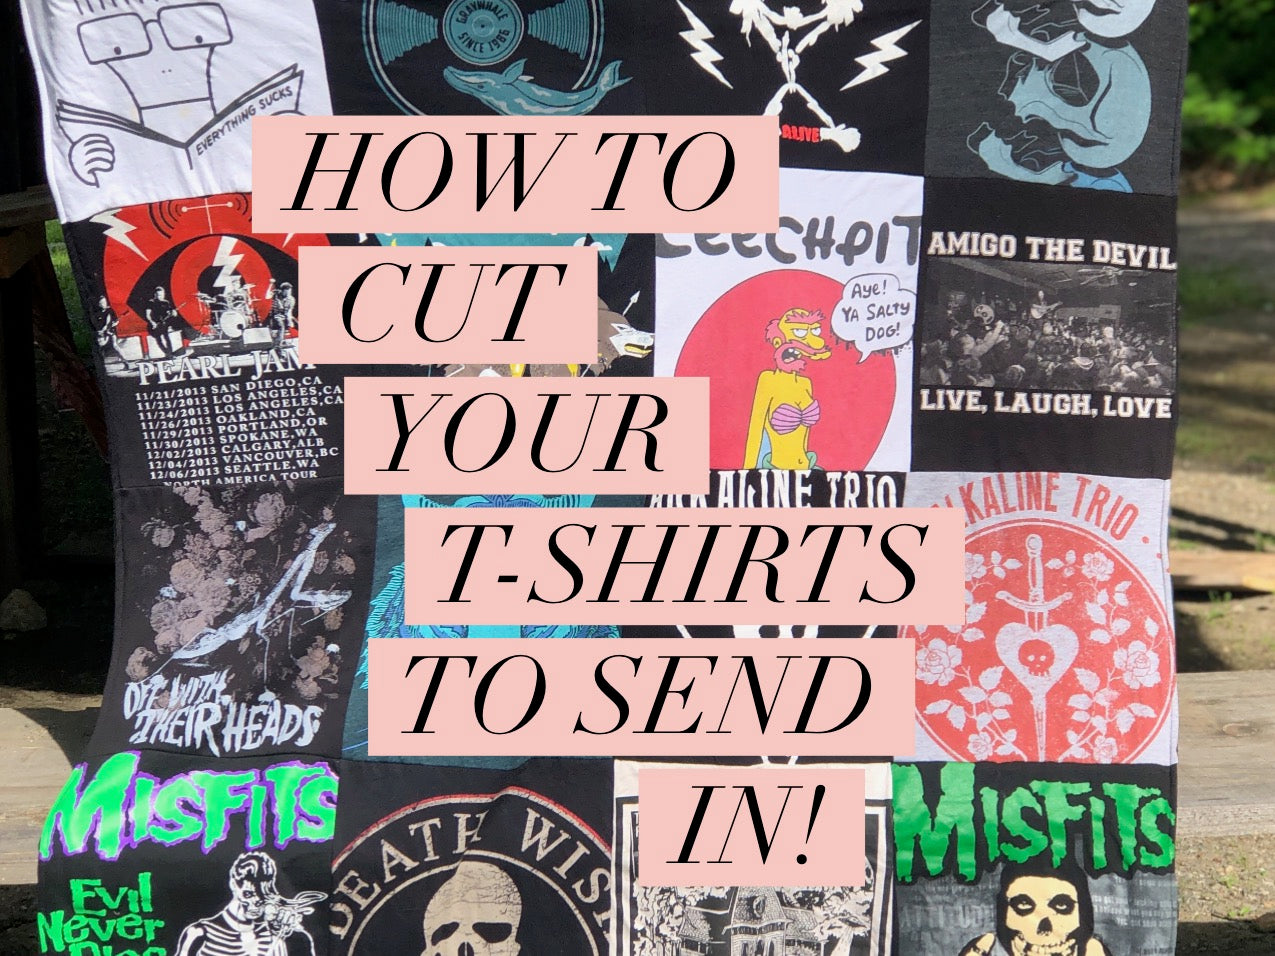 Directions on how to prep your t-shirts to send in to us!